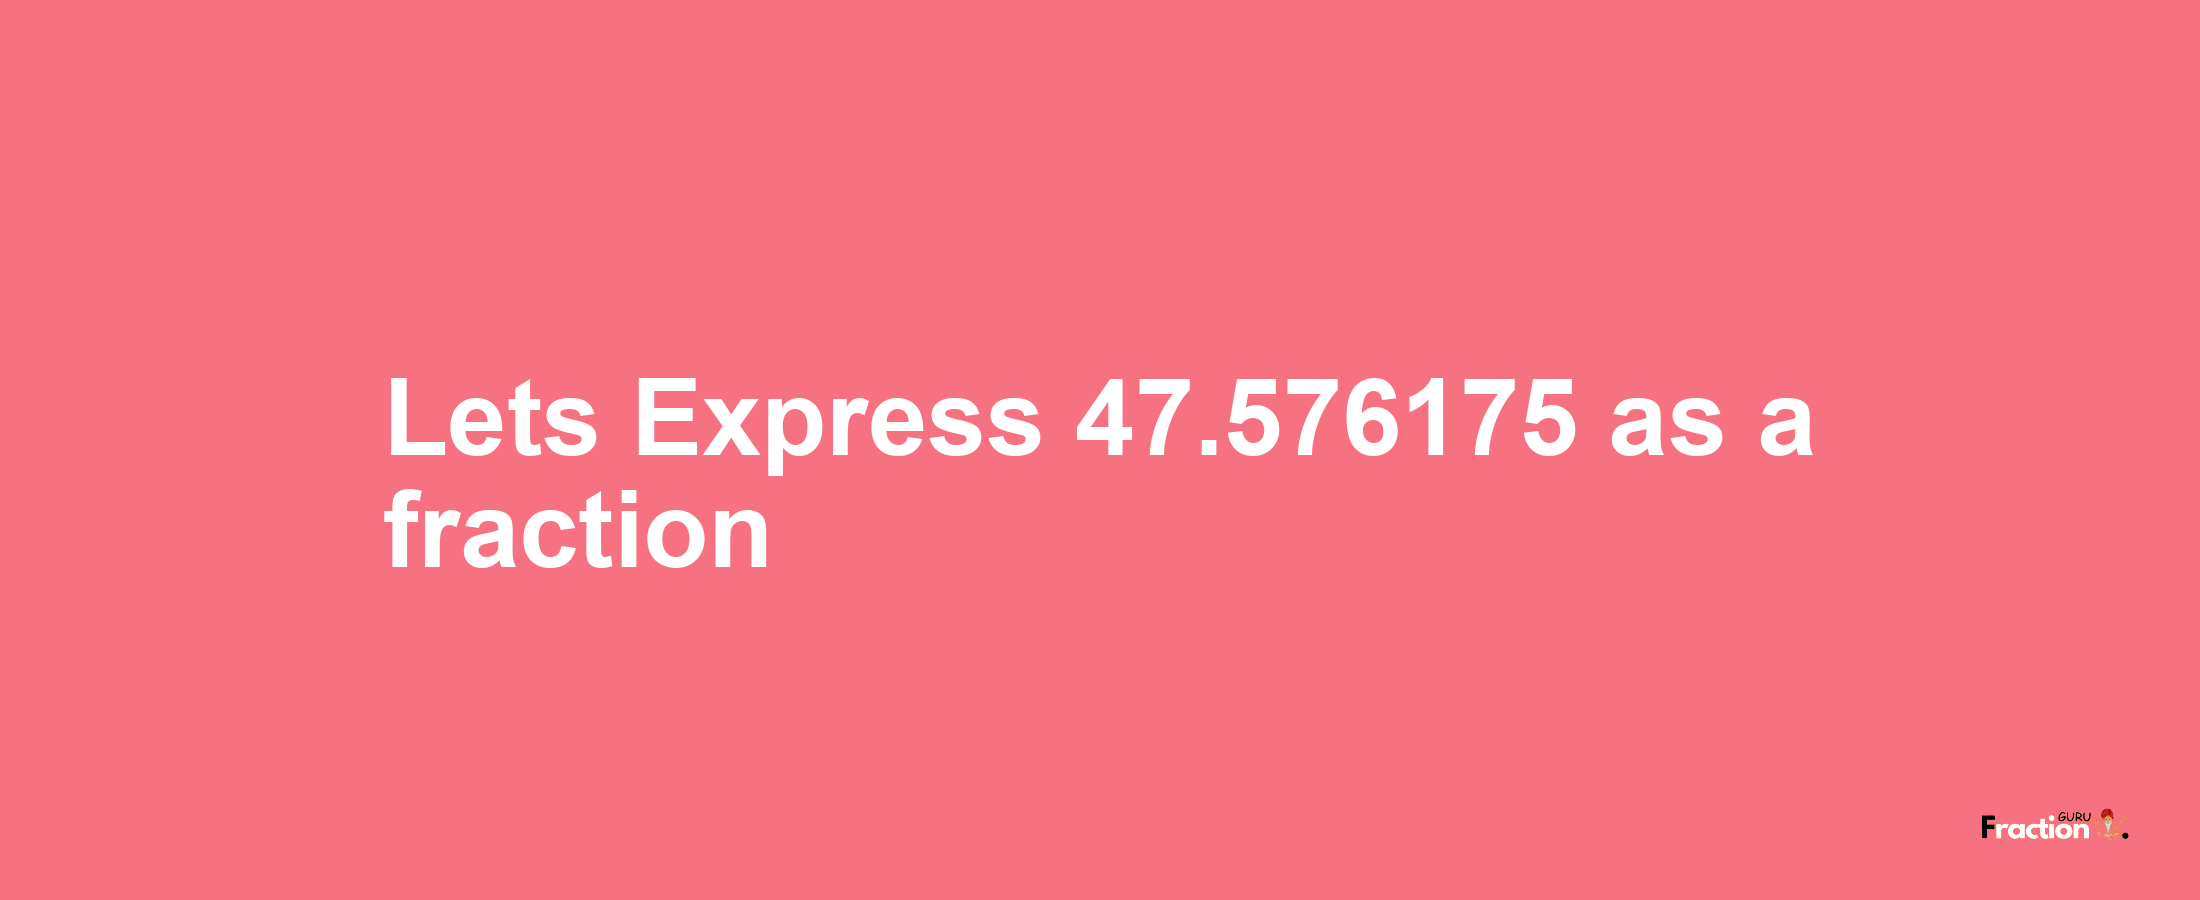 Lets Express 47.576175 as afraction